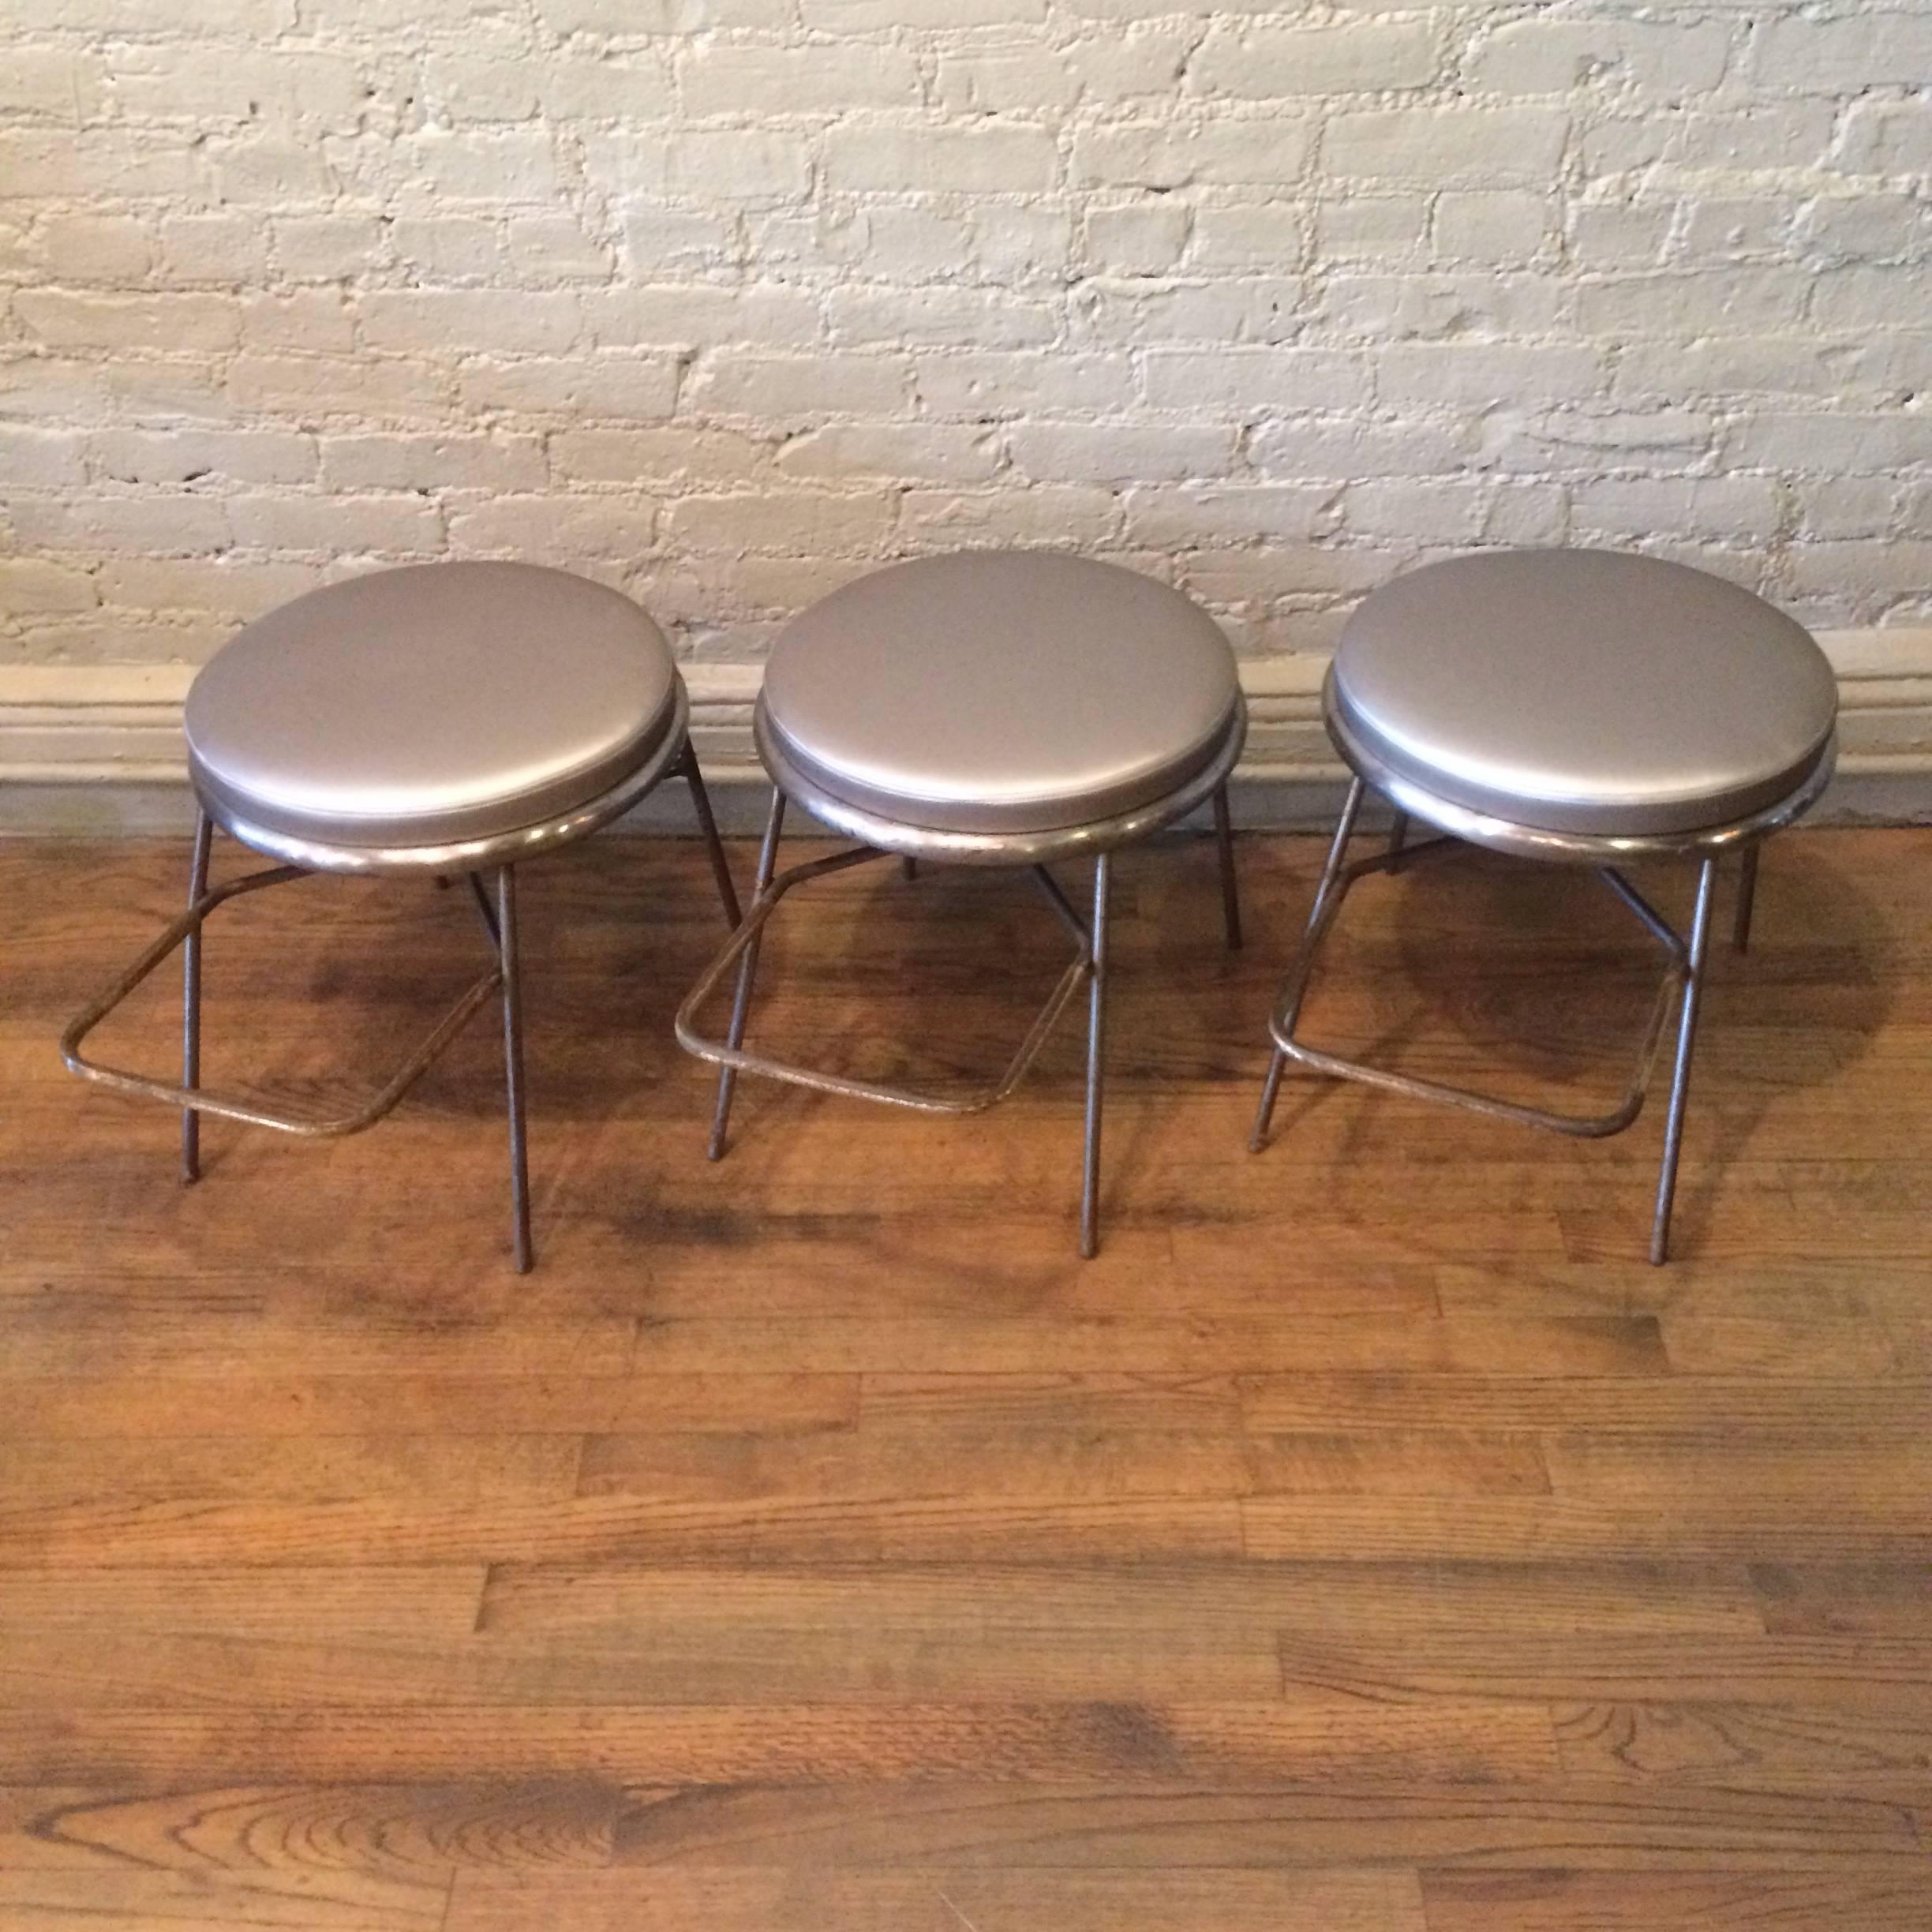 Midcentury, shoe store, fitting stools feature patinated, brushed steel frames with brass-plated footrests and newly upholstered silver vinyl seats. Two stools are available, sold individually.
 